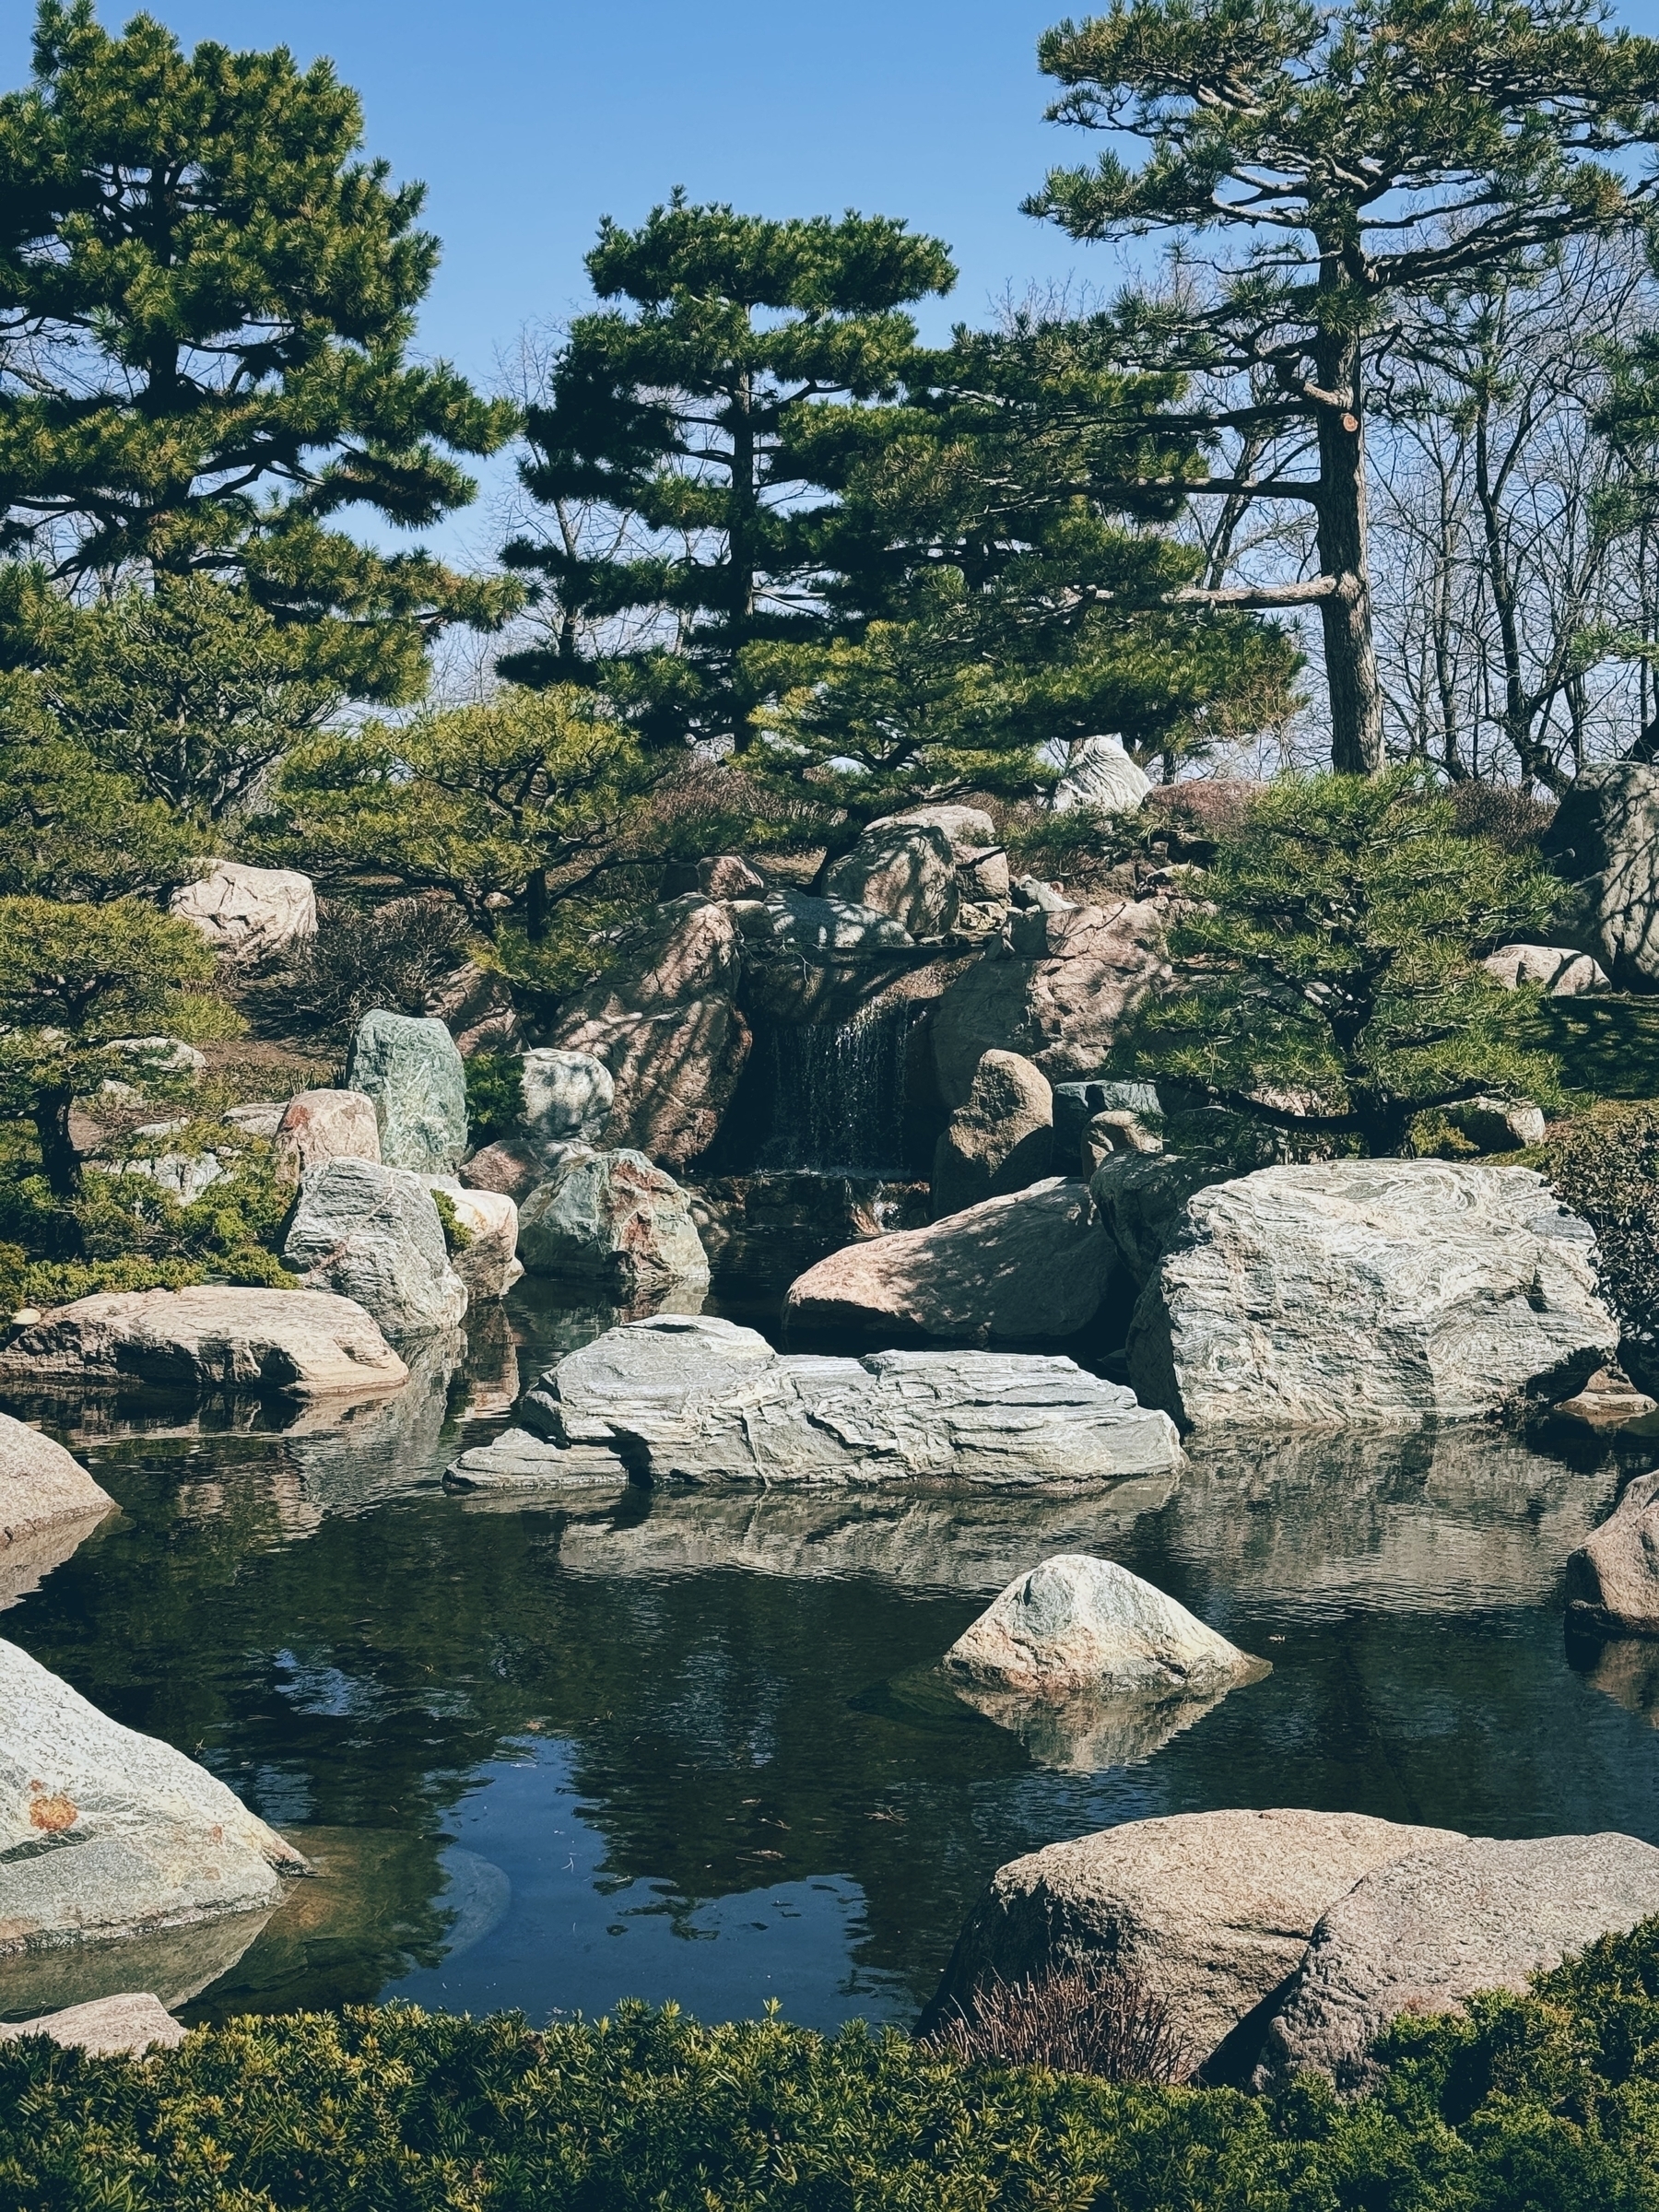 Manicured Japanese garden with rocks, water, and trees. 